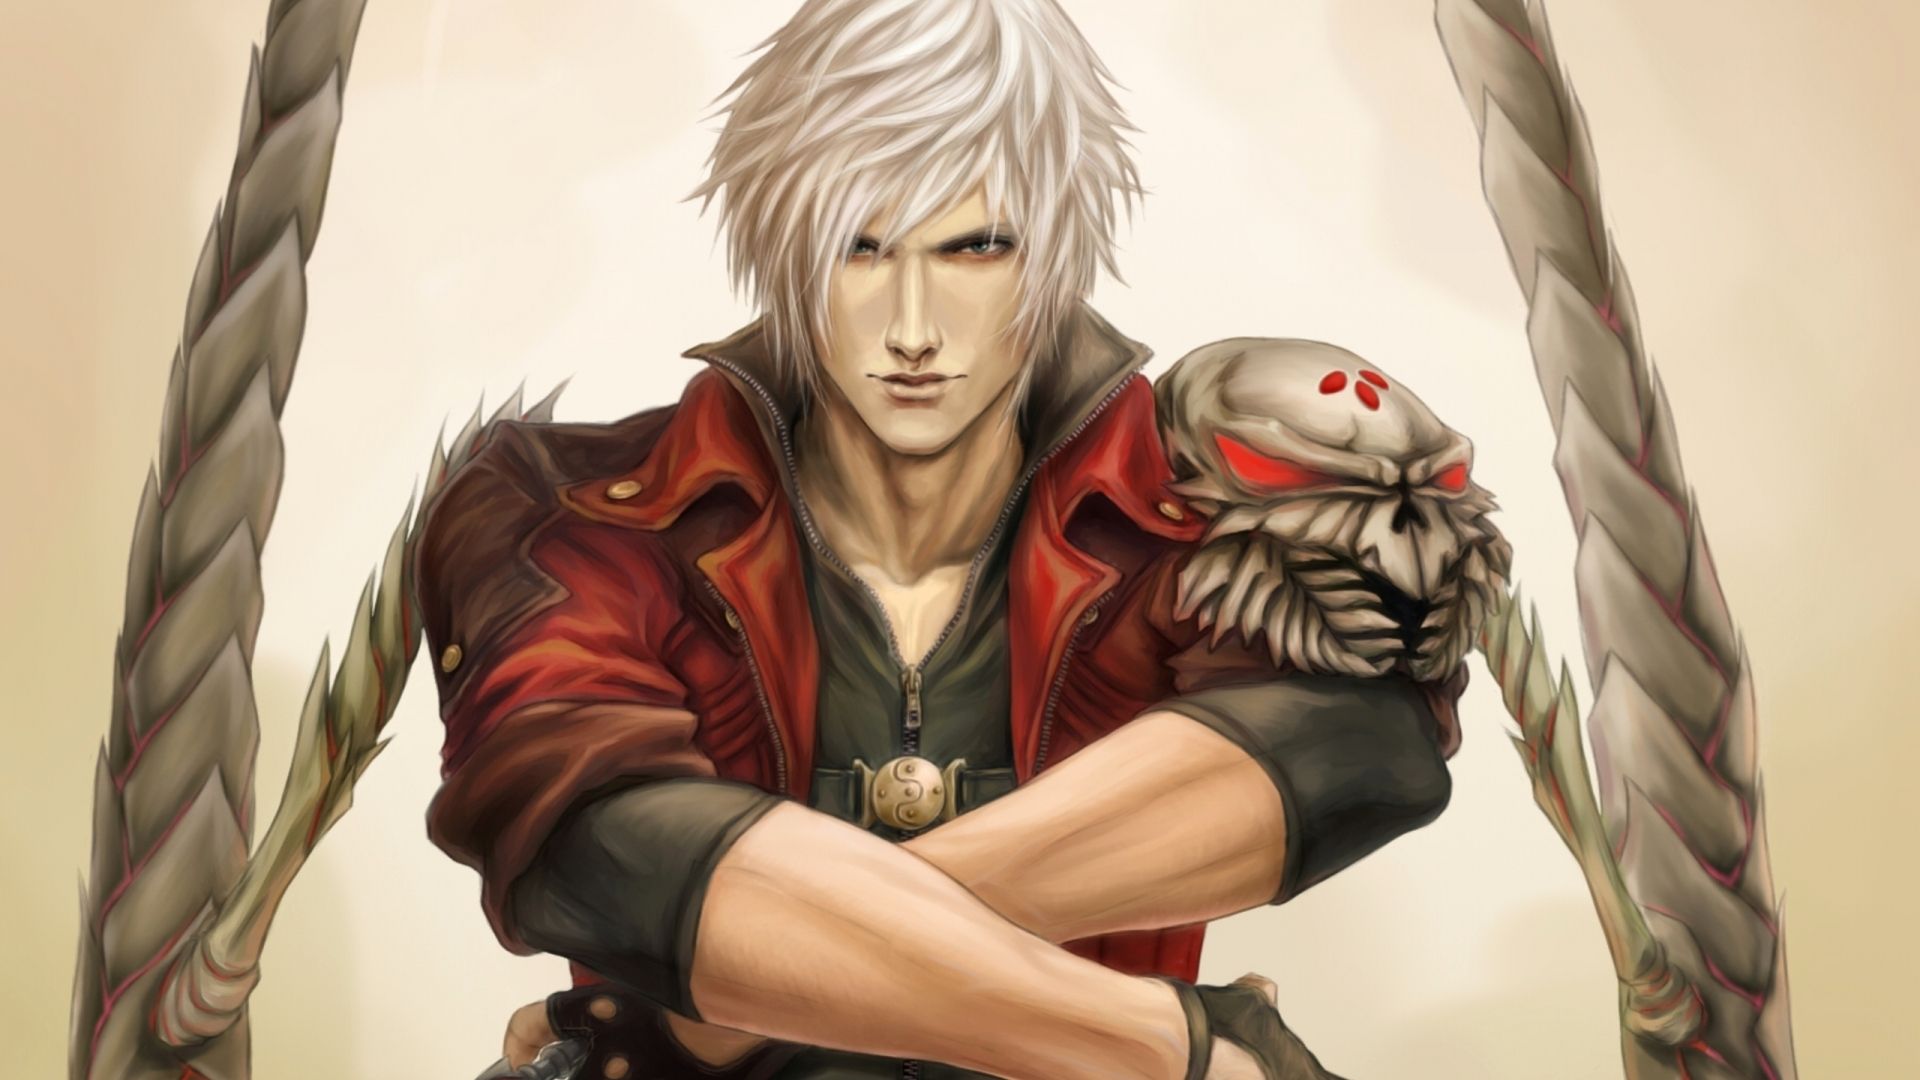 devil may cry Wallpaper - Download Free Gaming Wallpapers